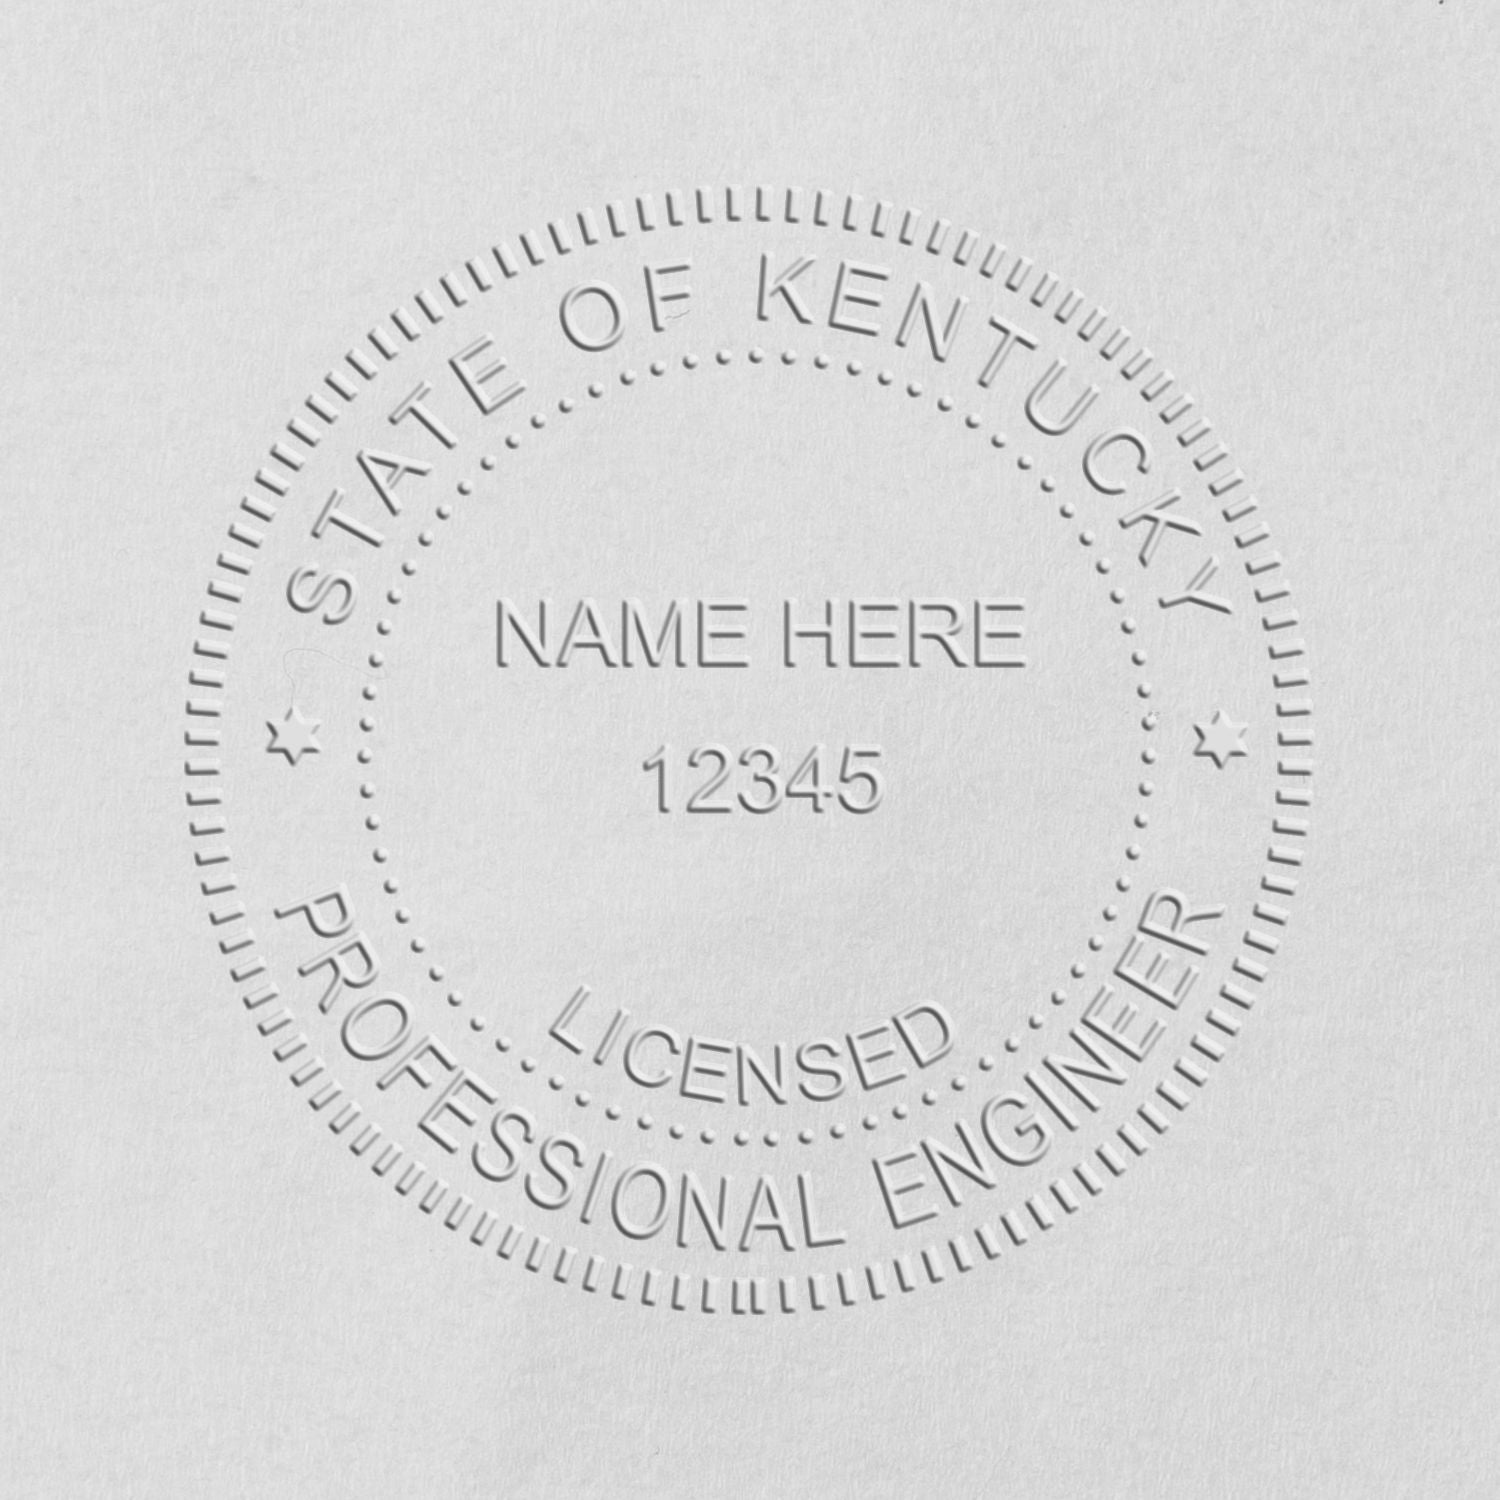 An in use photo of the Hybrid Kentucky Engineer Seal showing a sample imprint on a cardstock